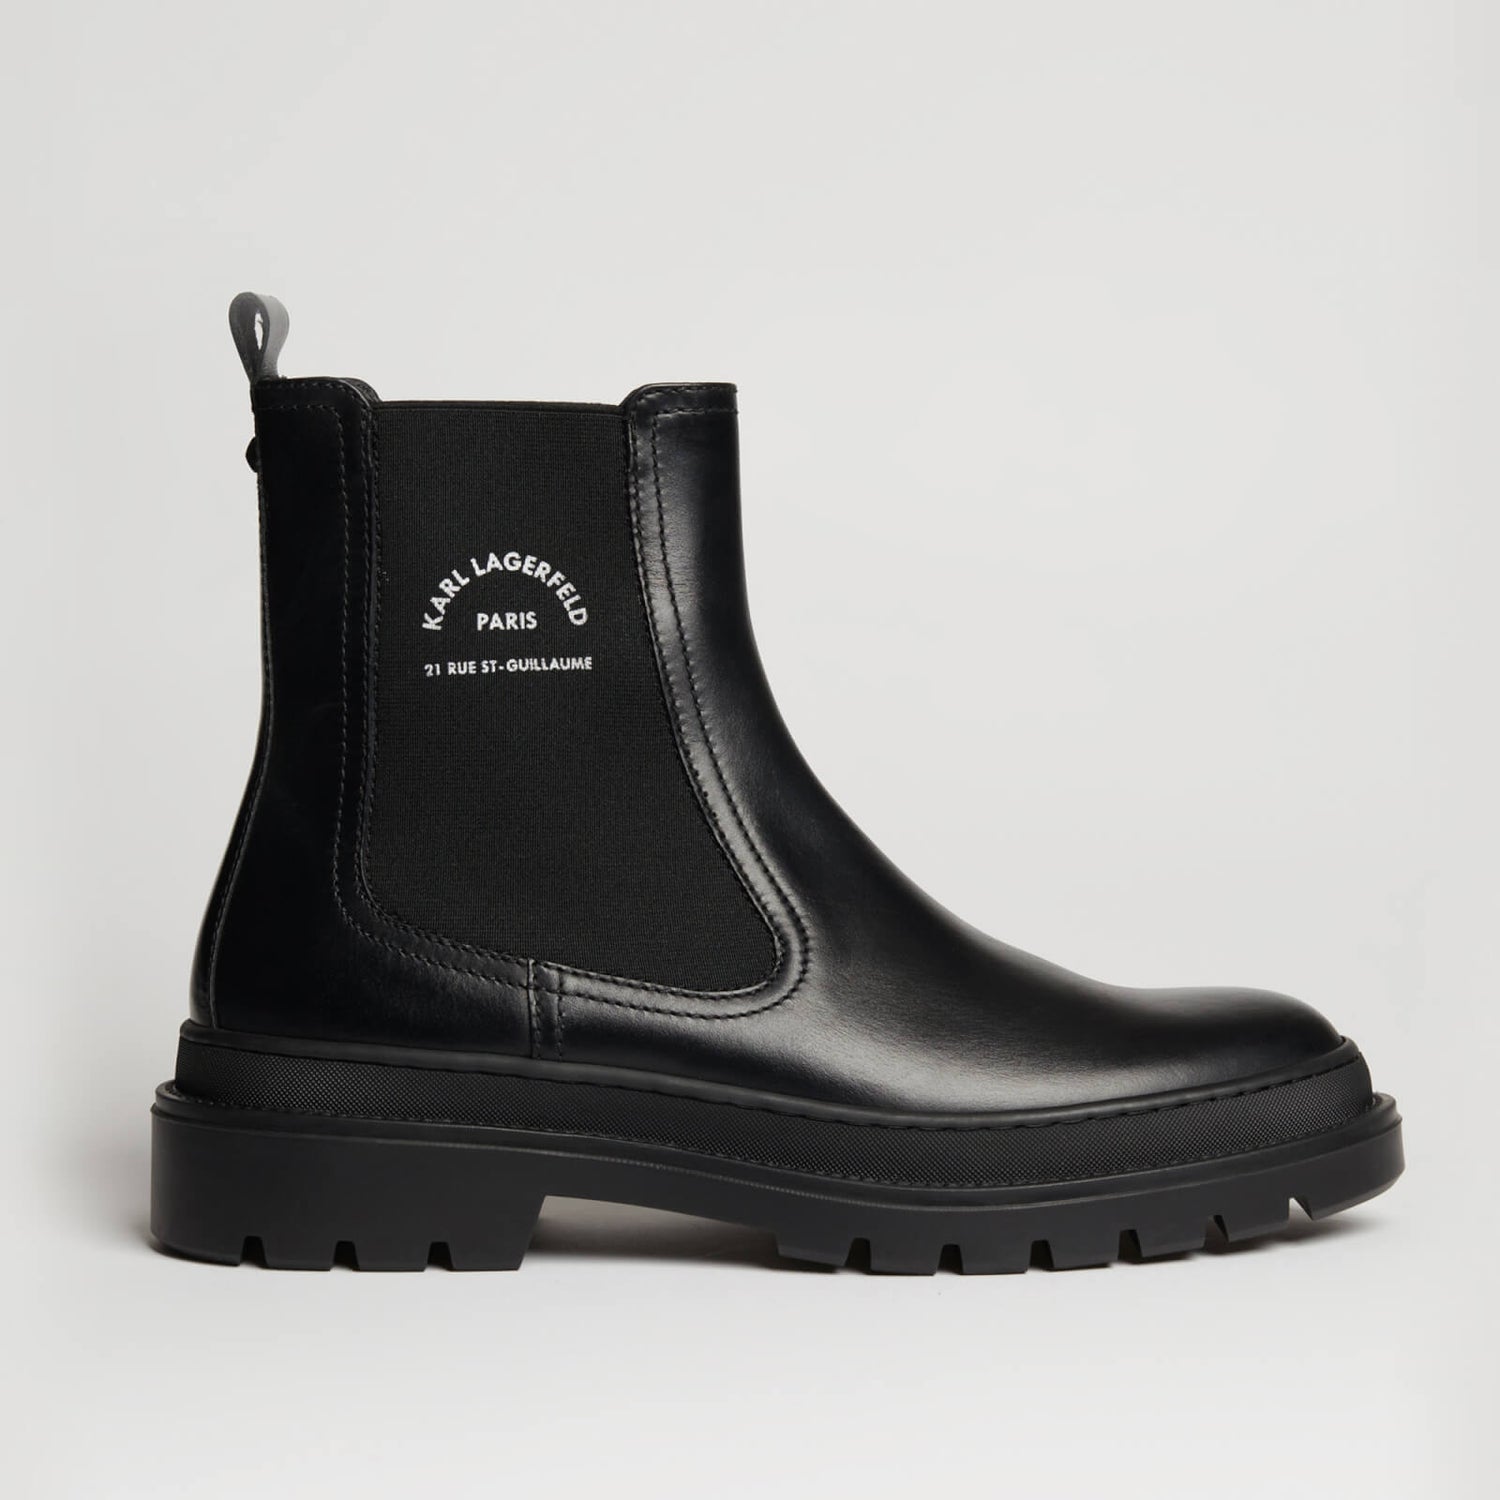 KARL LAGERFELD Outland Leather Chelsea Boots - UK 7